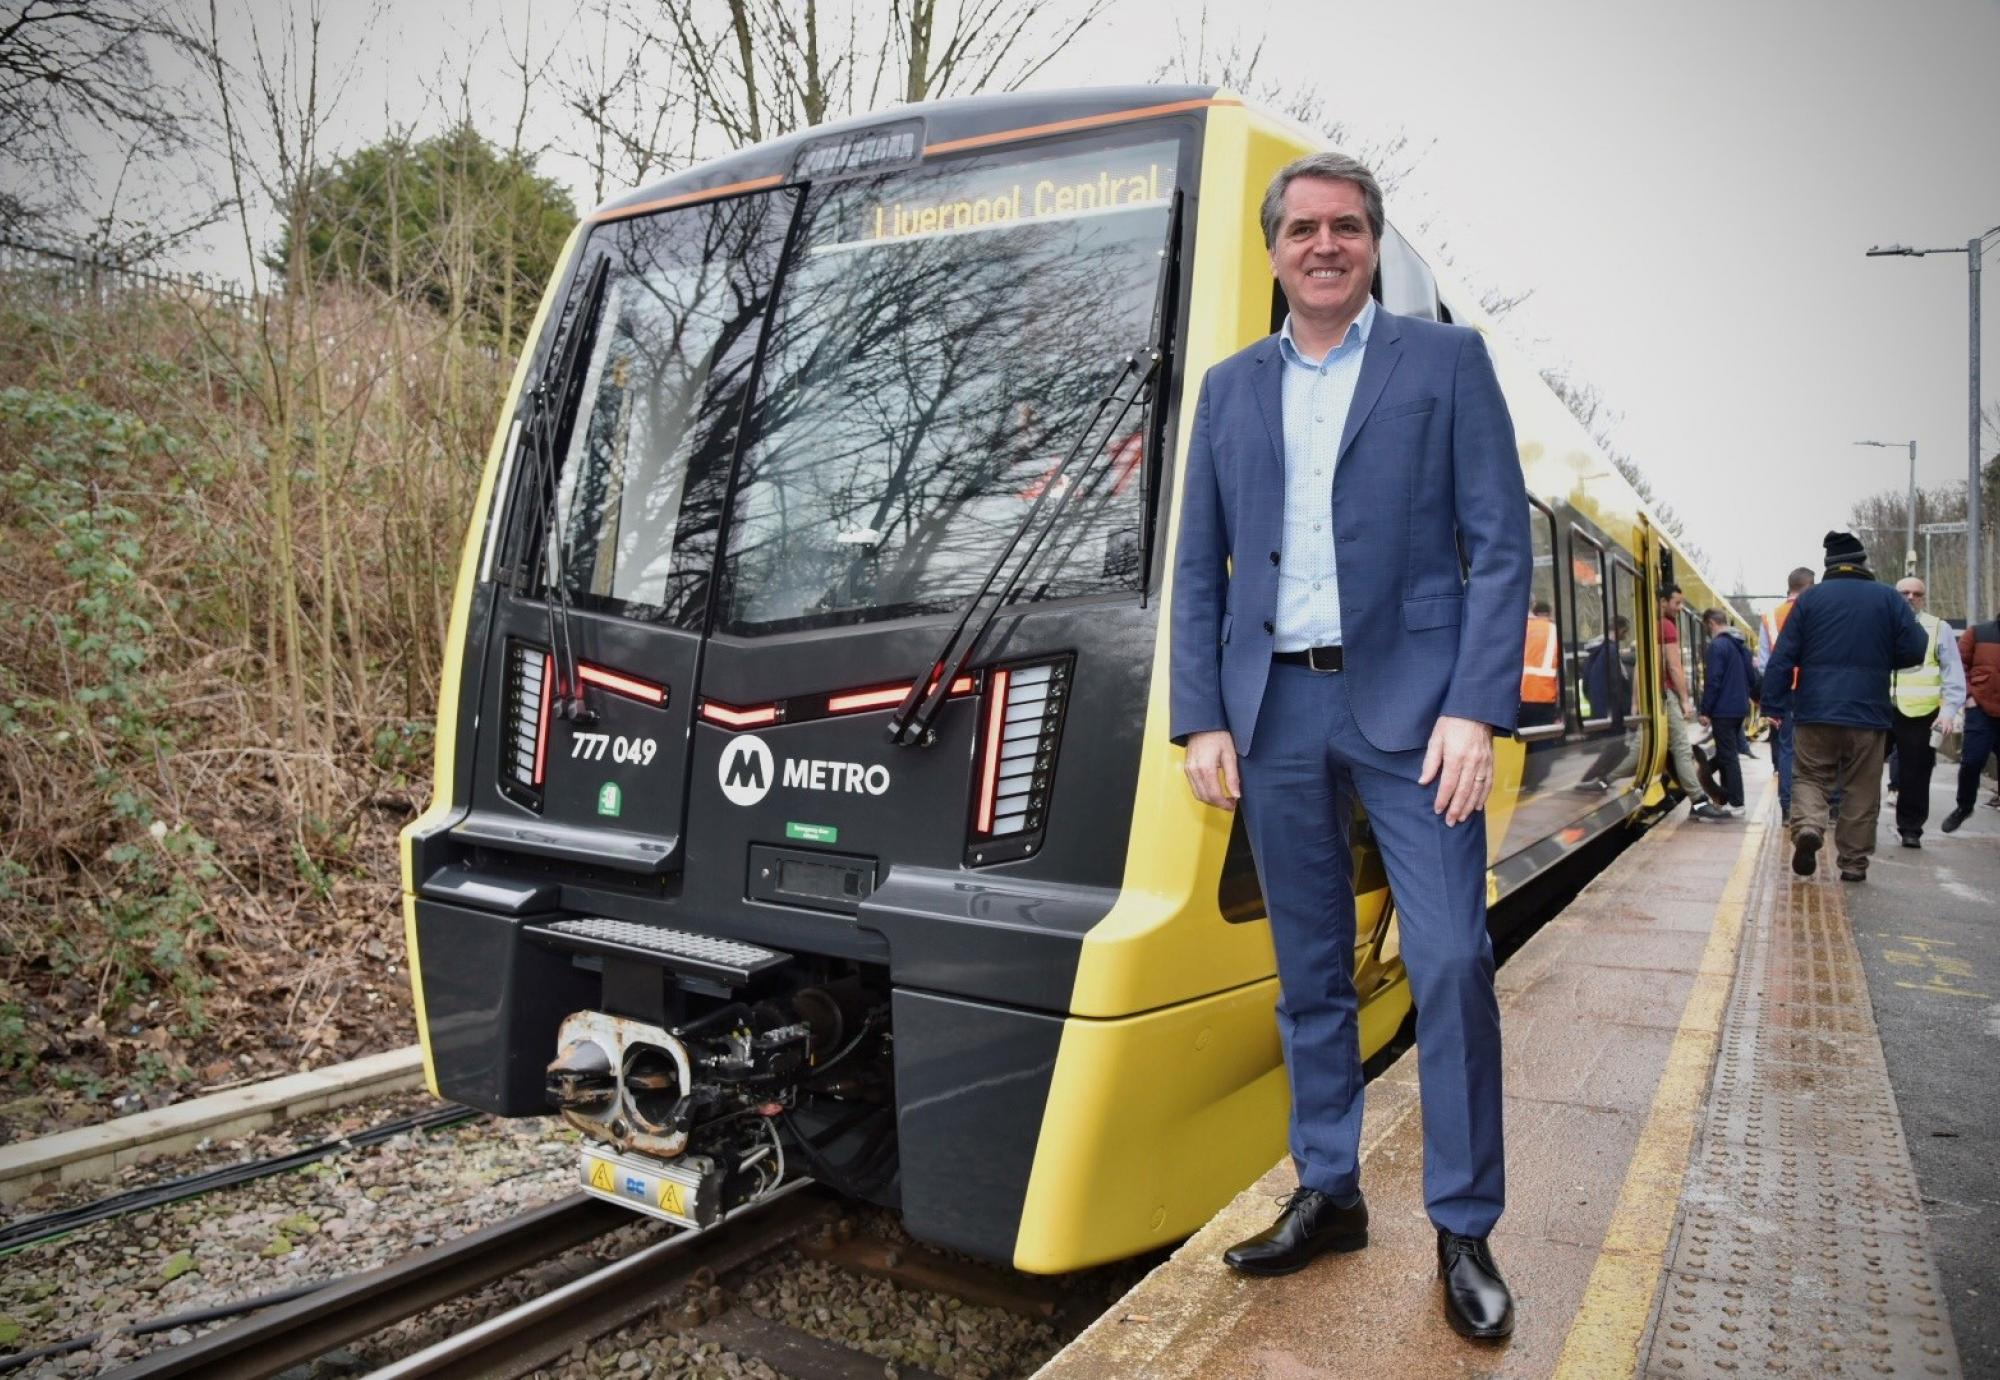 Liverpool City Region's New Trains expand coverage